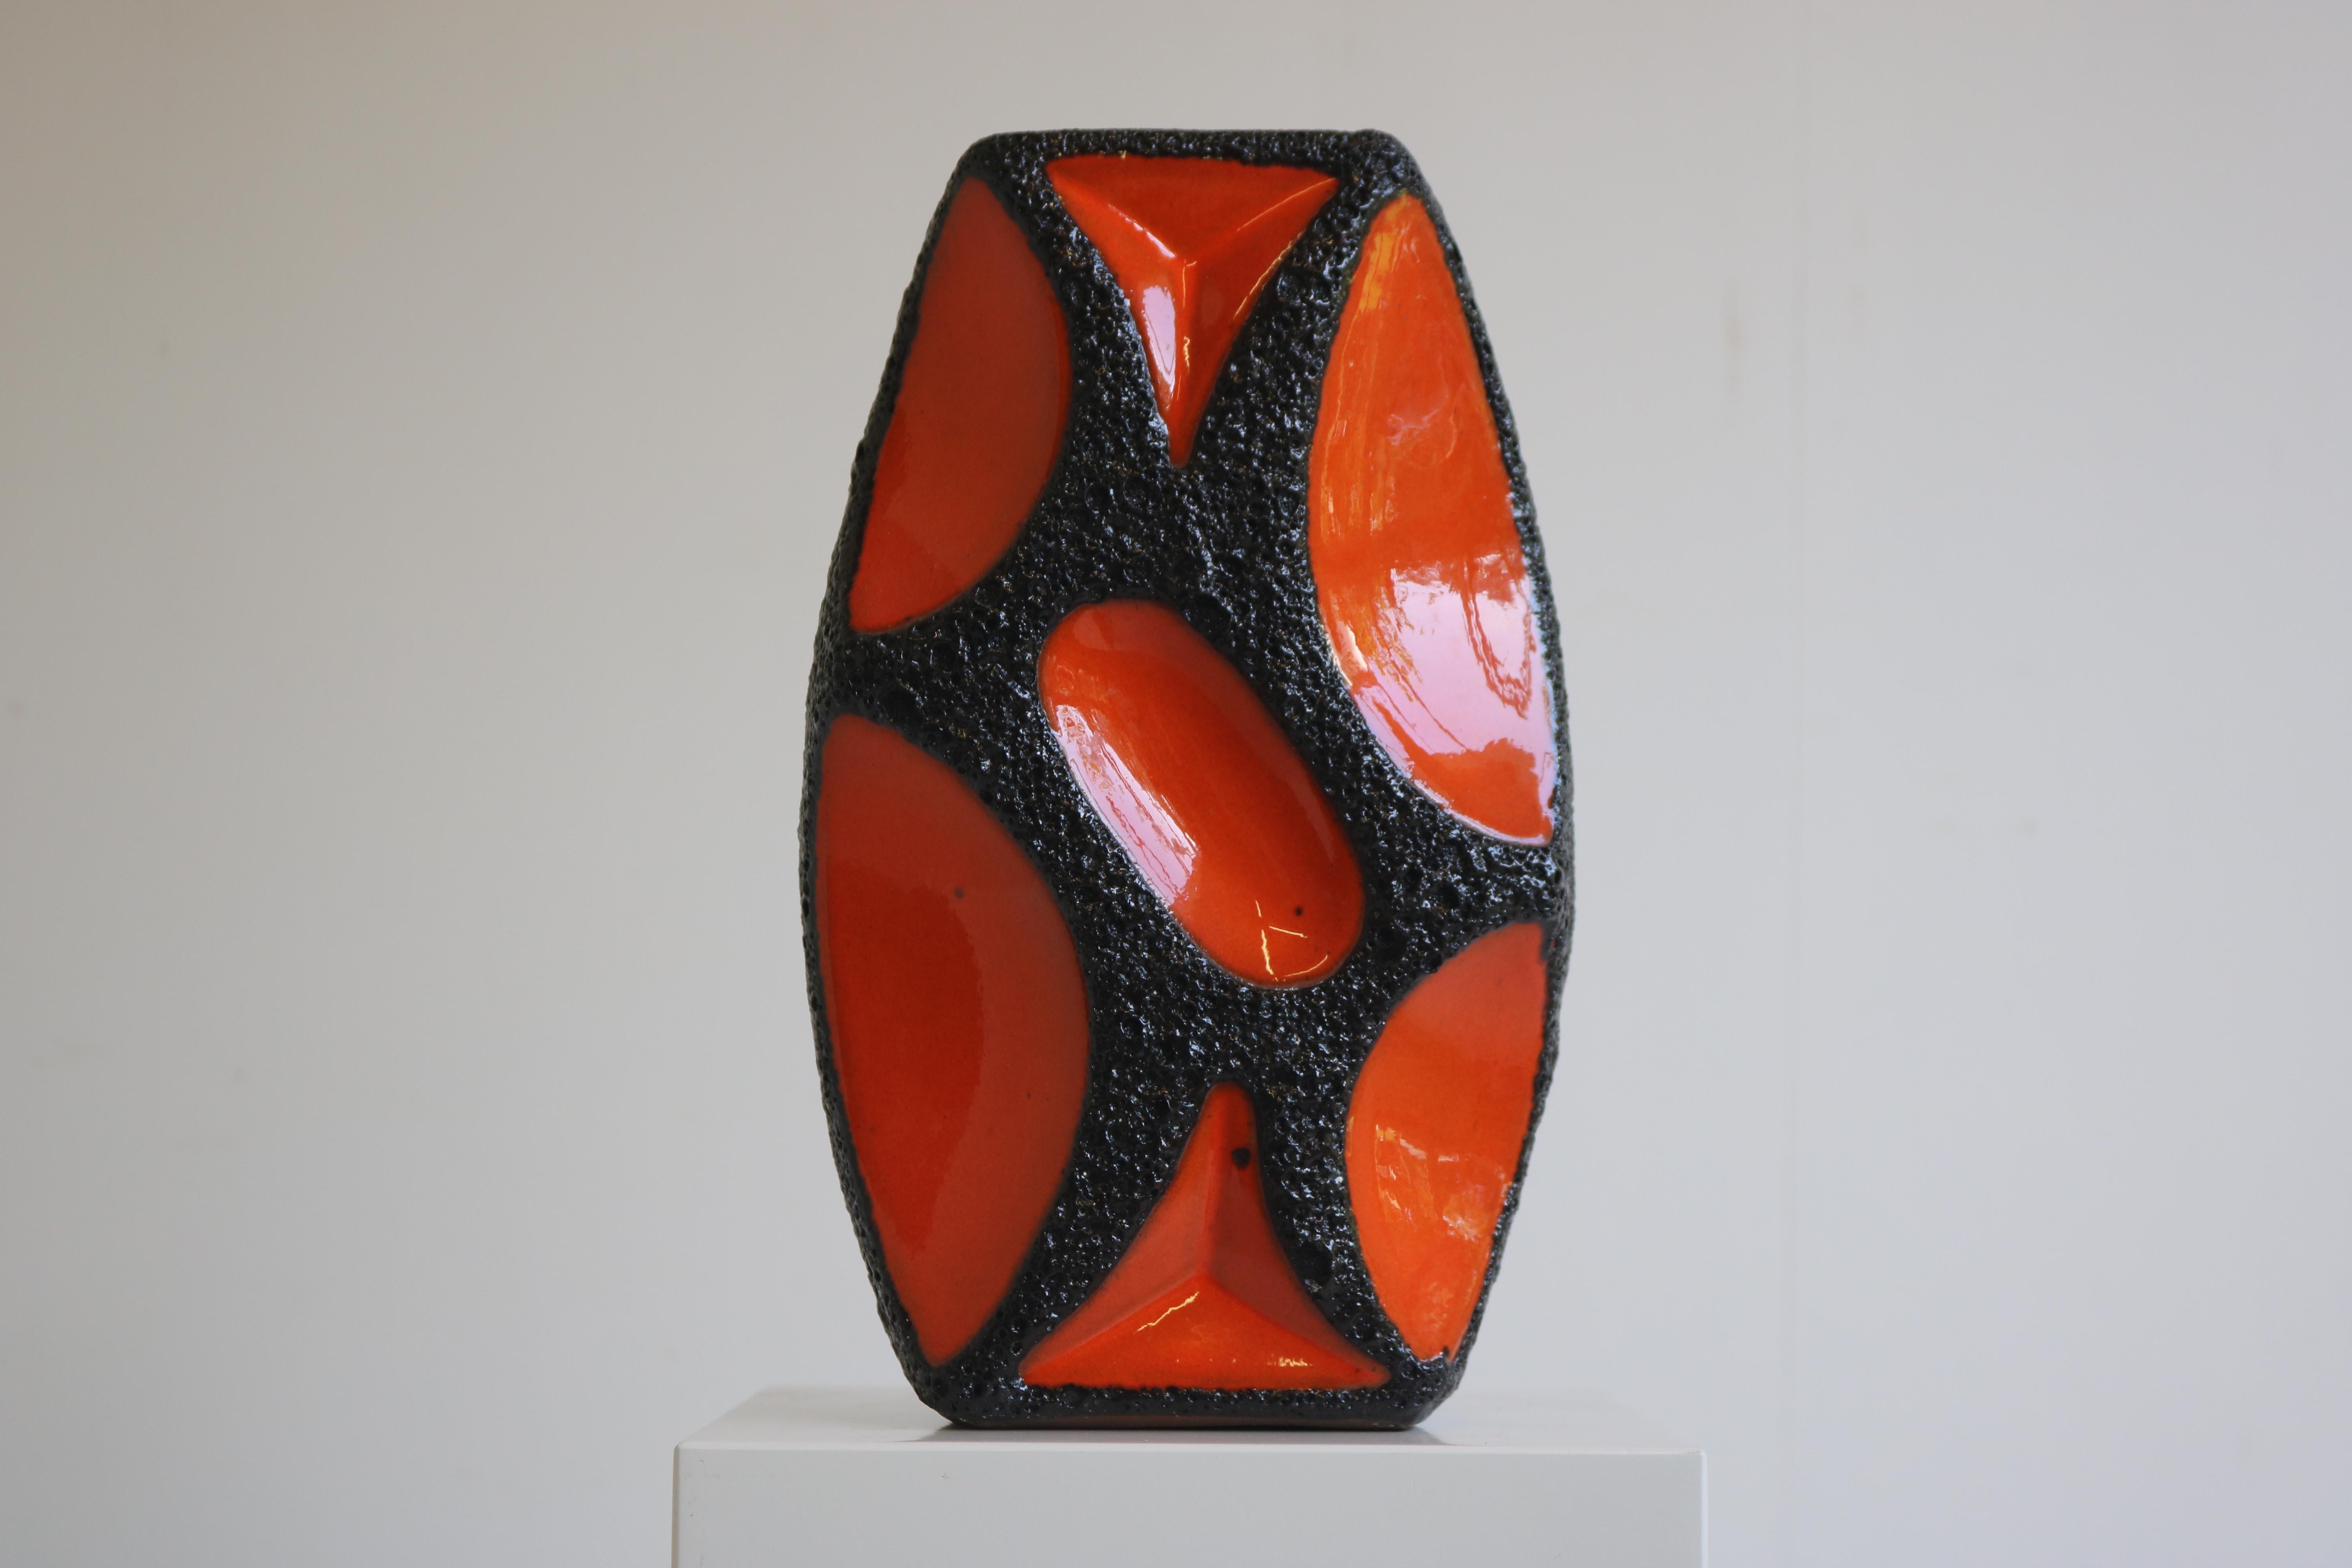 Looking for a statement piece that will show off your unique style? Look no further than this fabulous orange Fat lava vase by Roth Keramik from 1970!
Crafted from high-quality ceramic, this vase is sure to stand the test of time in both durability